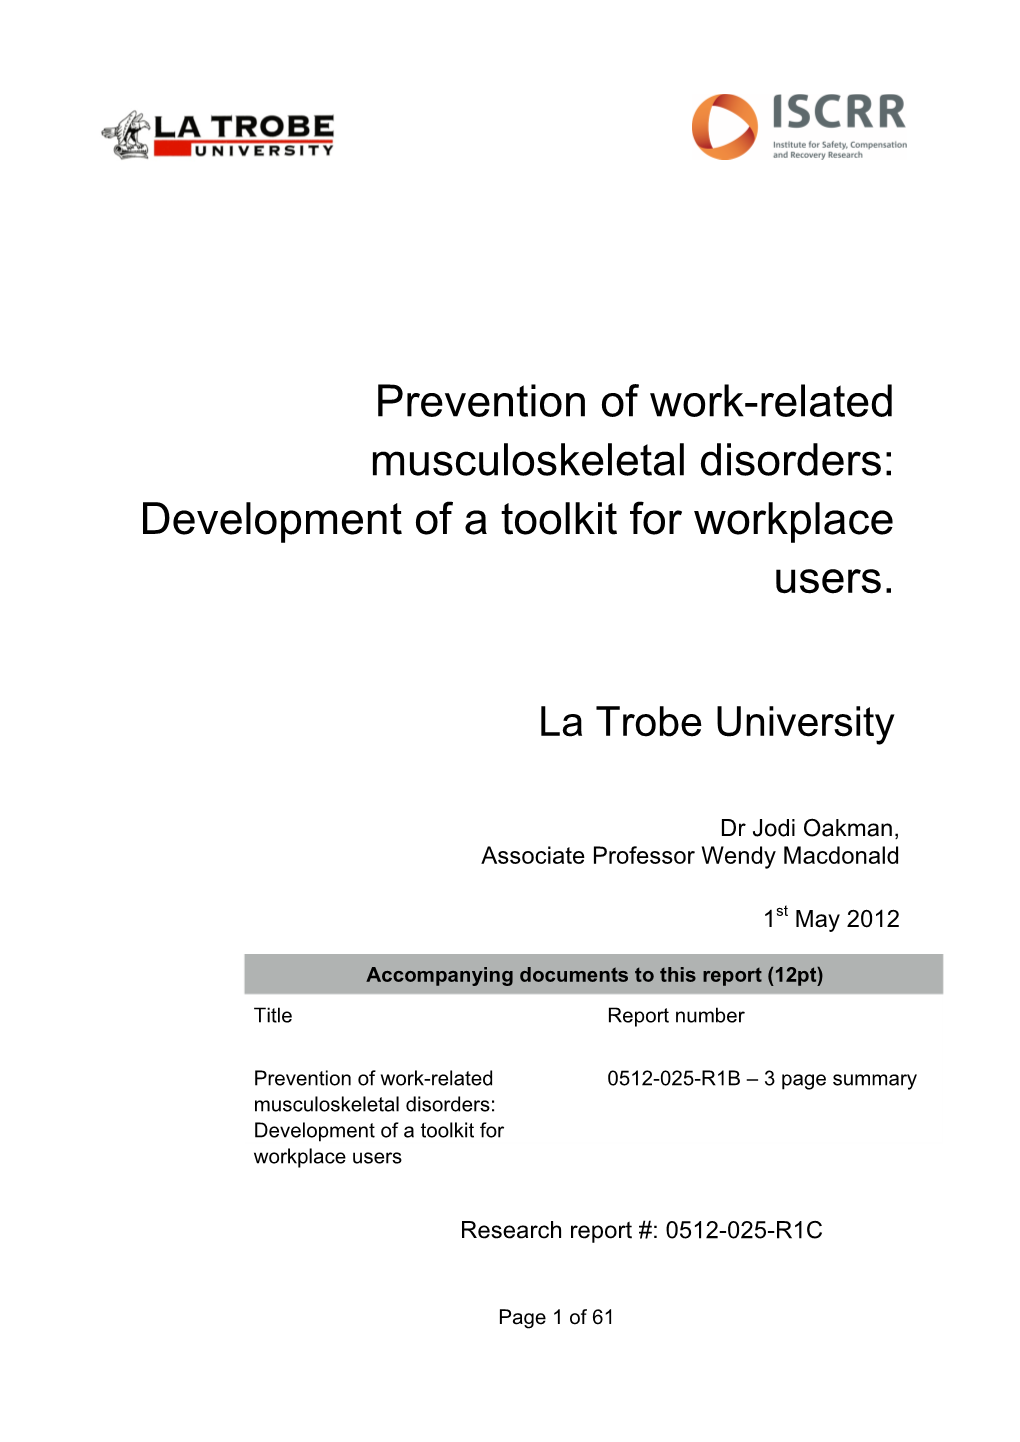 Prevention of Work-Related Musculoskeletal Disorders: Development of a Toolkit for Workplace Users